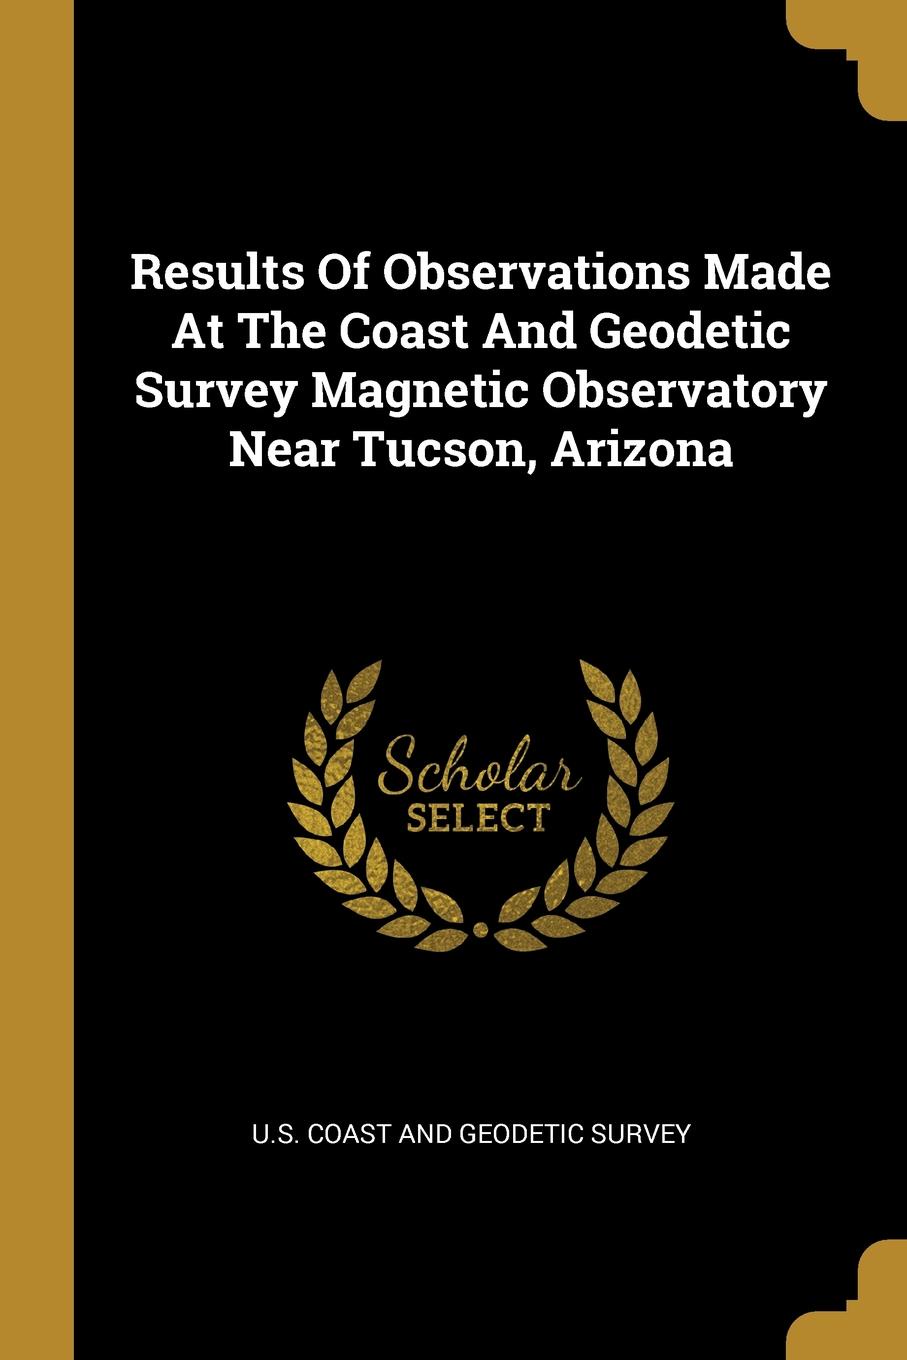 Results Of Observations Made At The Coast And Geodetic Survey Magnetic Observatory Near Tucson, Arizona